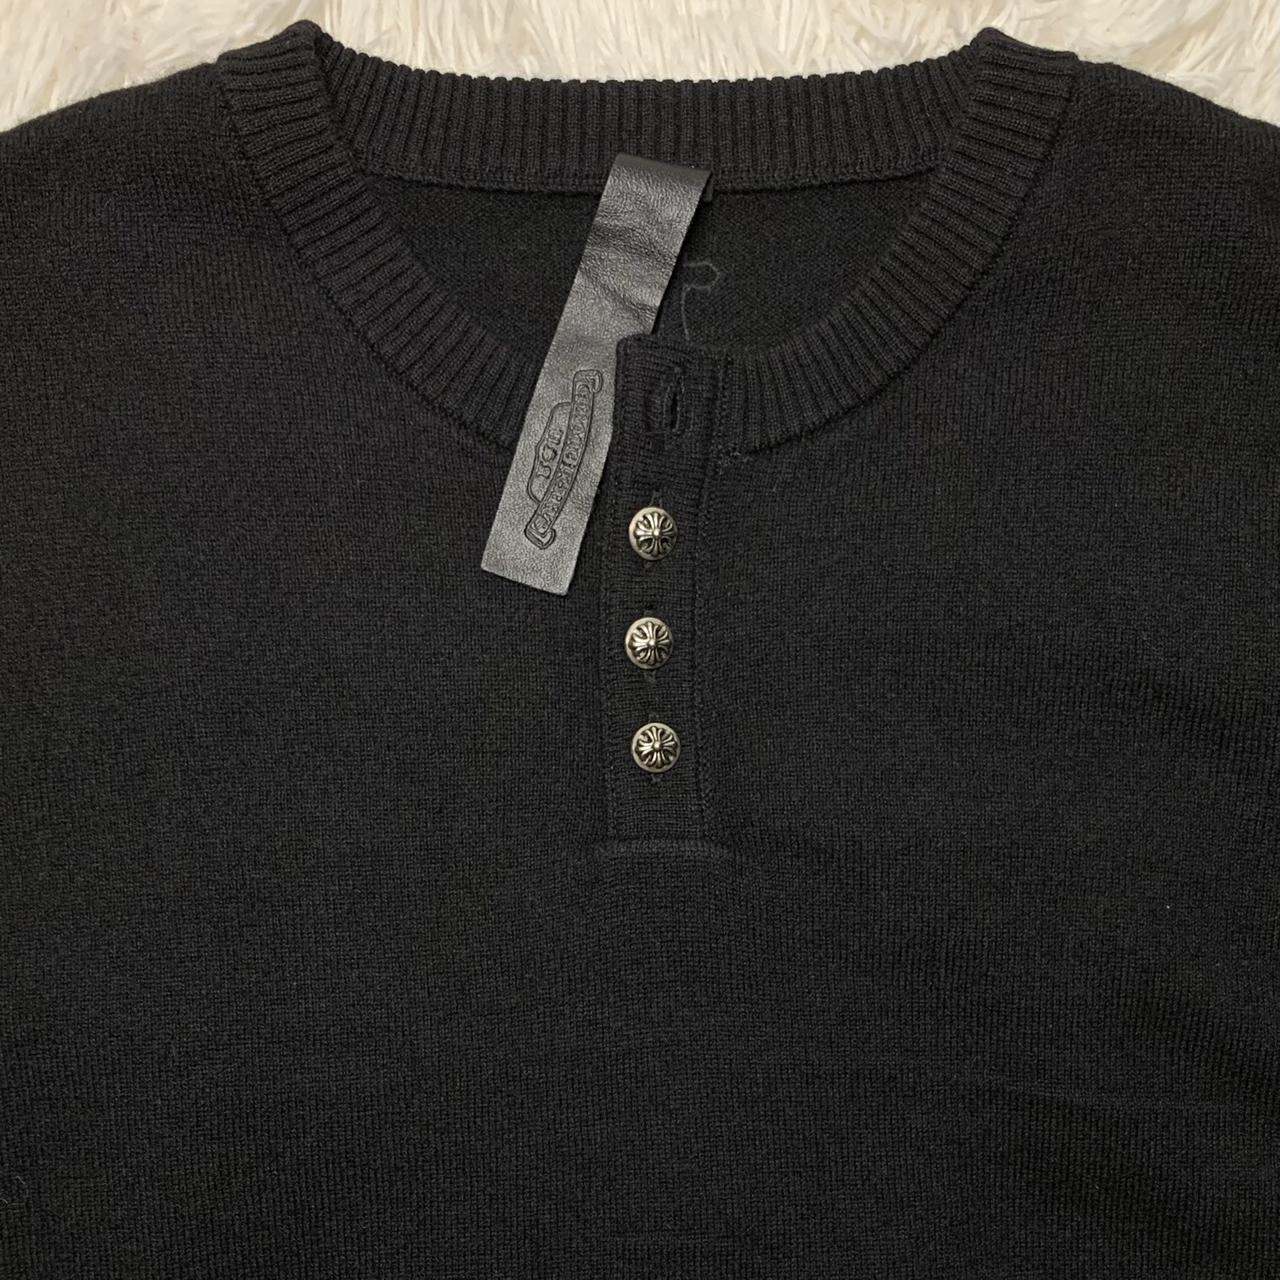 Chrome Hearts Cashmere Sweater Open to... - Depop